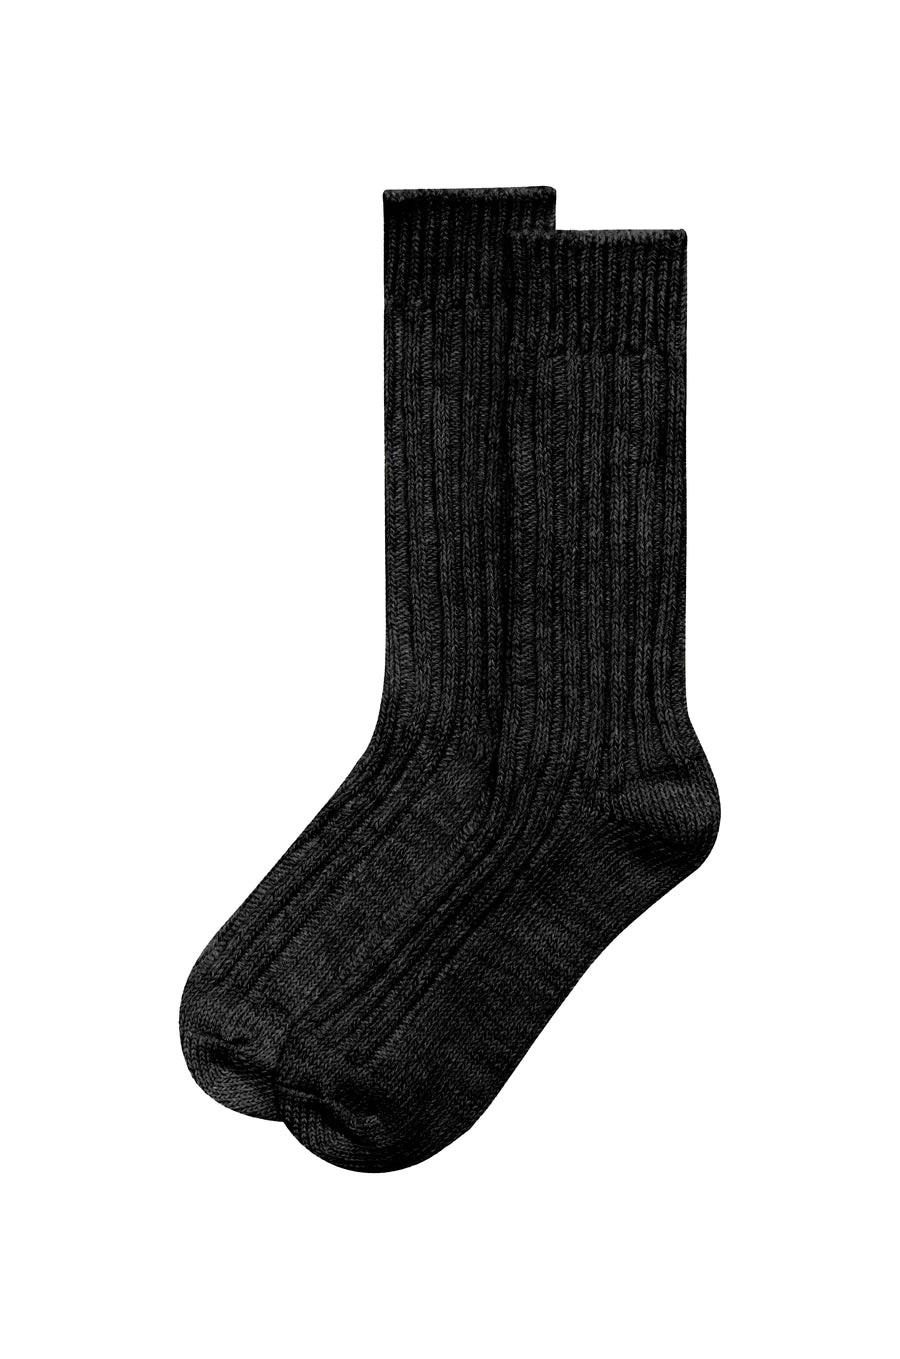 The Woven Sock